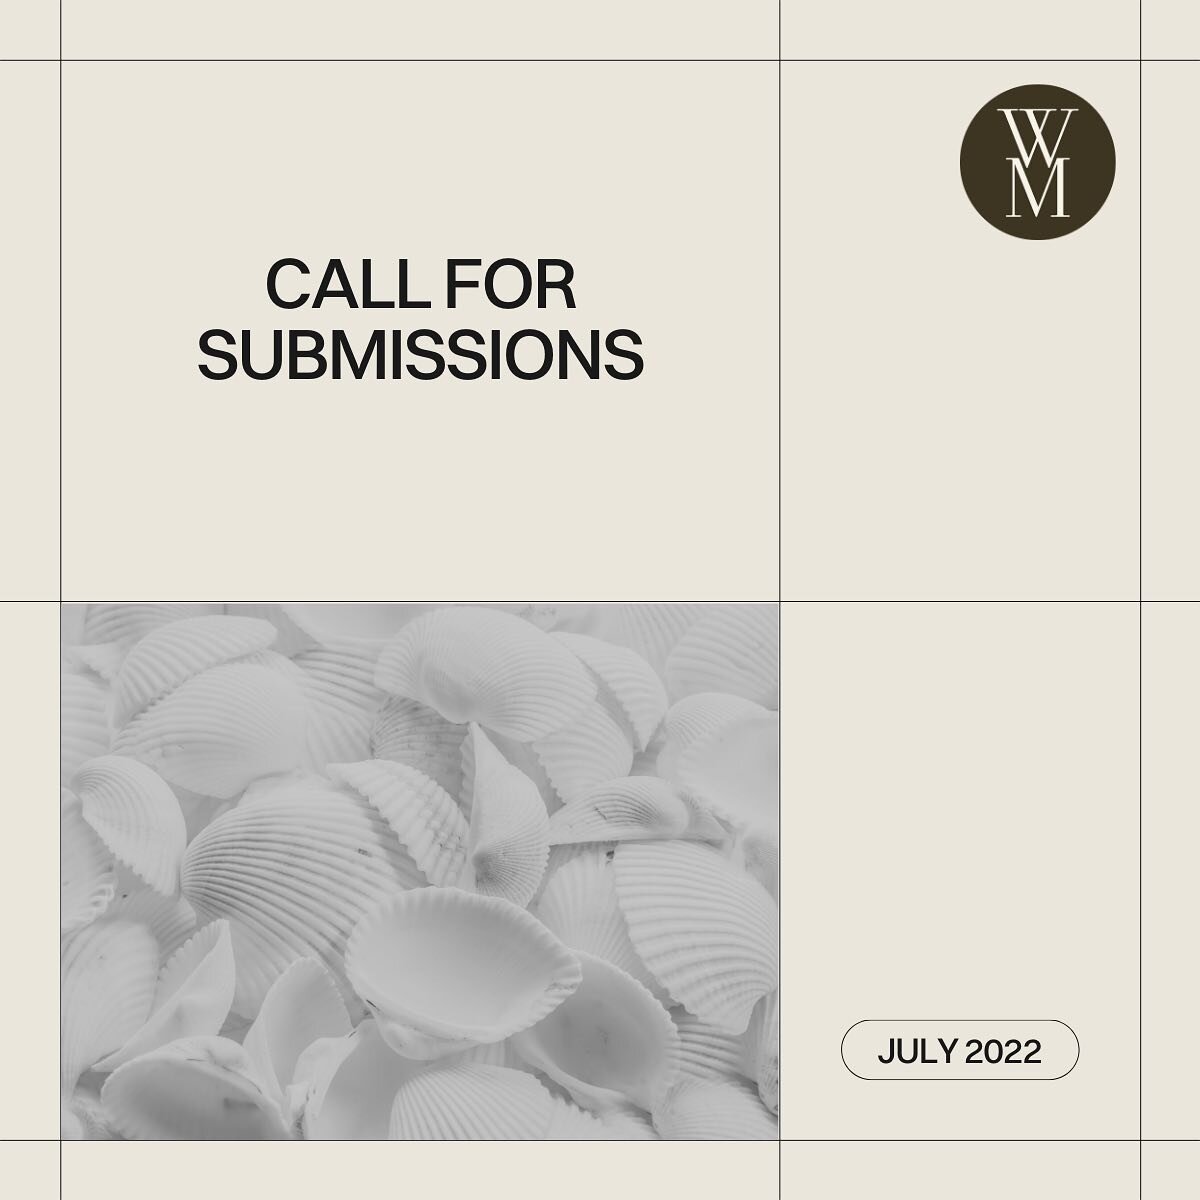 🔔 Submissions are now open for Issue 02, and due July 31st!

✍️ This issue's (optional) literary theme: Coming of Age

📓 This issue's (optional) essay prompt: &quot;On Keeping a Notebook,&quot; inspired by Joan Didion [read the original and write y